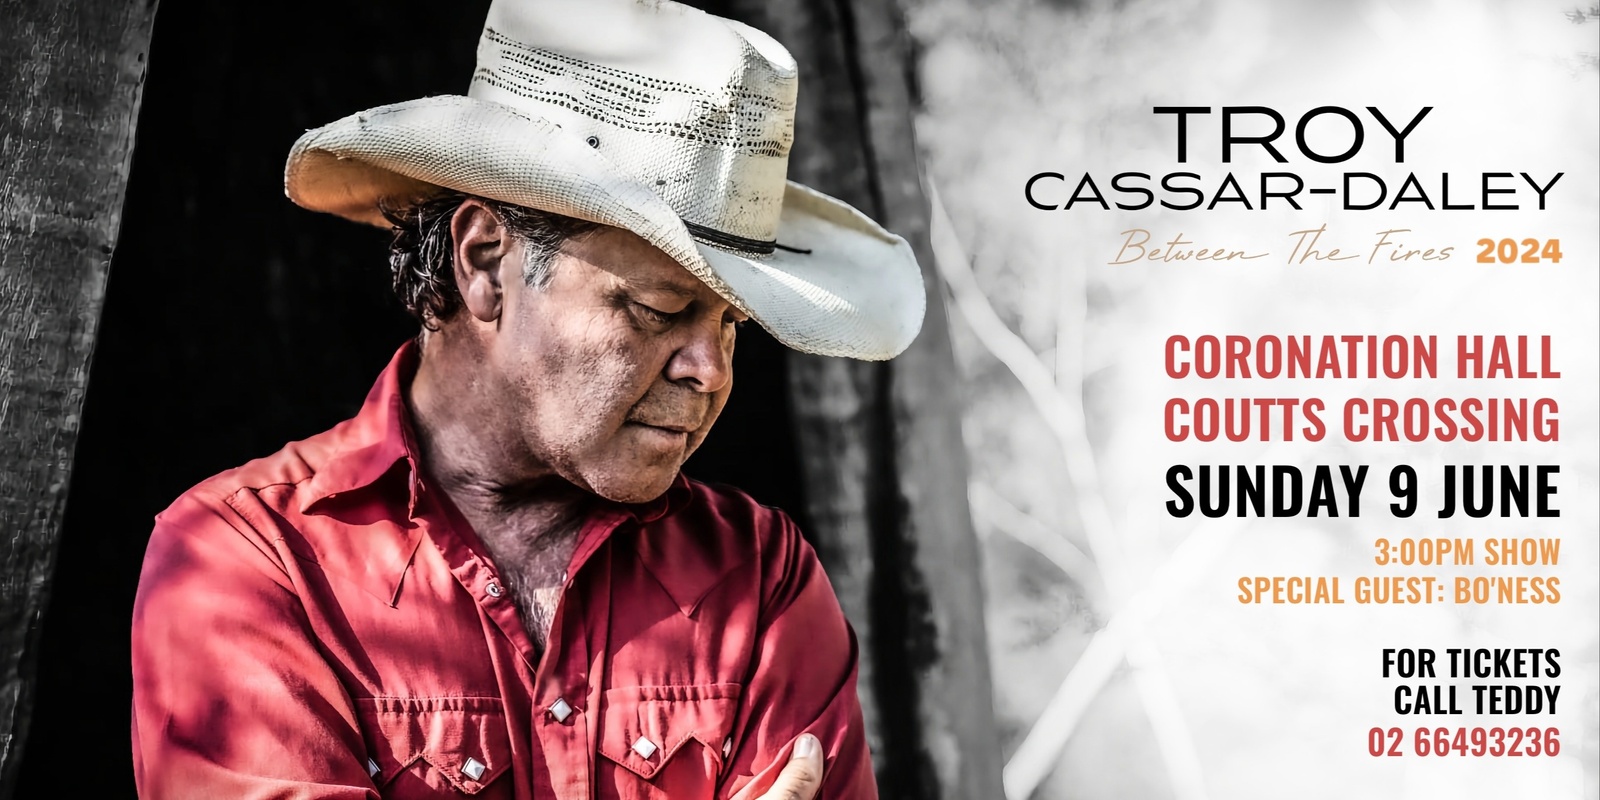 Banner image for Troy Cassar-Daley - Between the Fires tour 2024